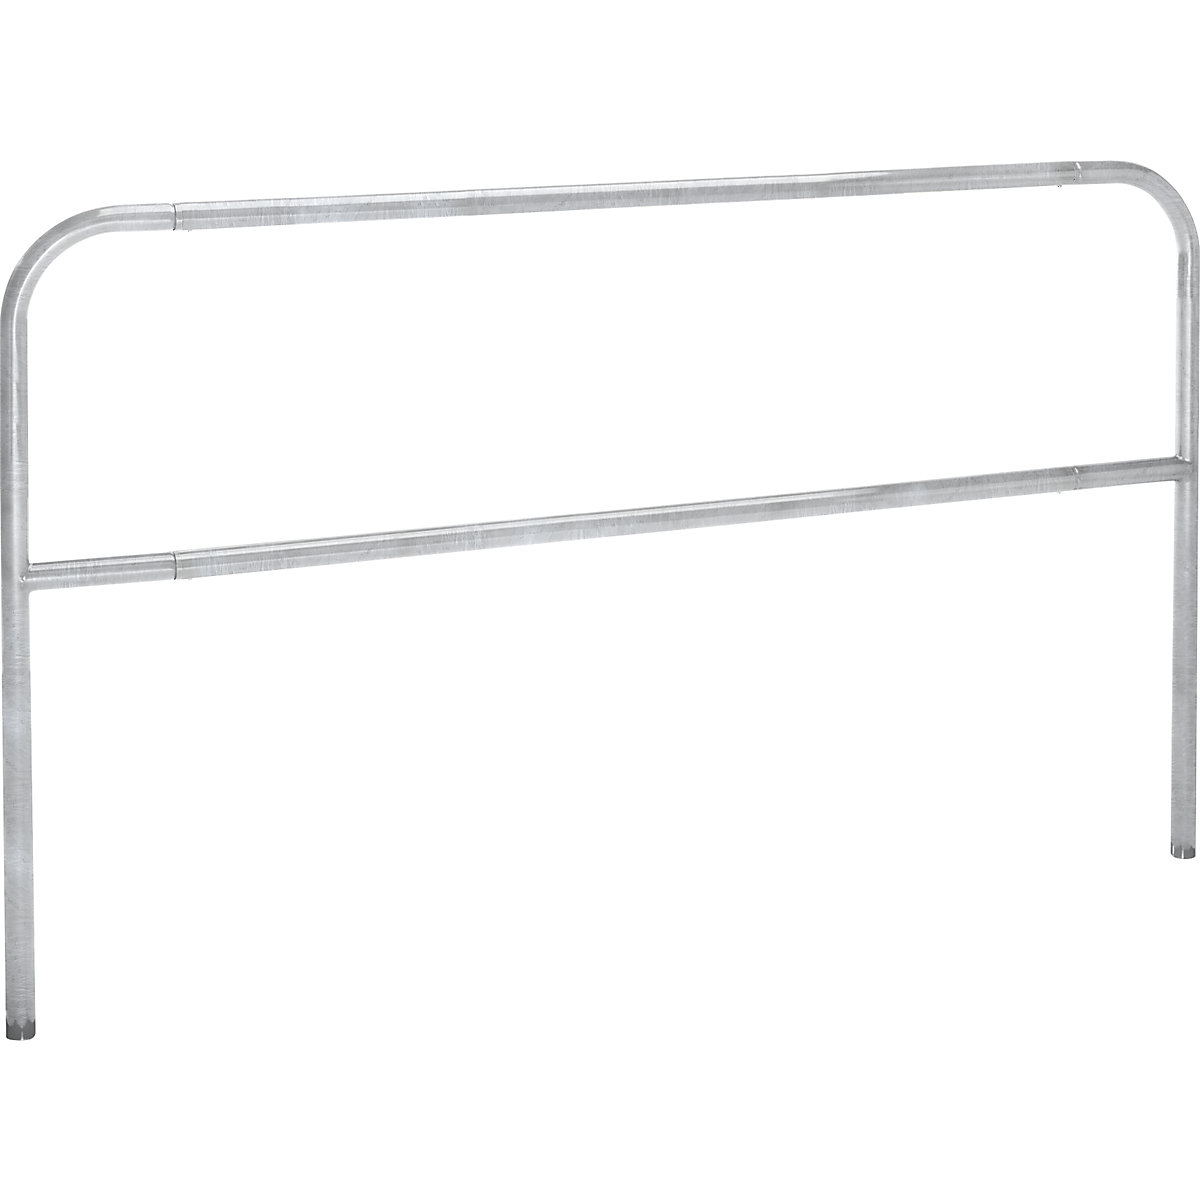 Crash protection bar, for setting in concrete, width 2000 mm, zinc plated-8